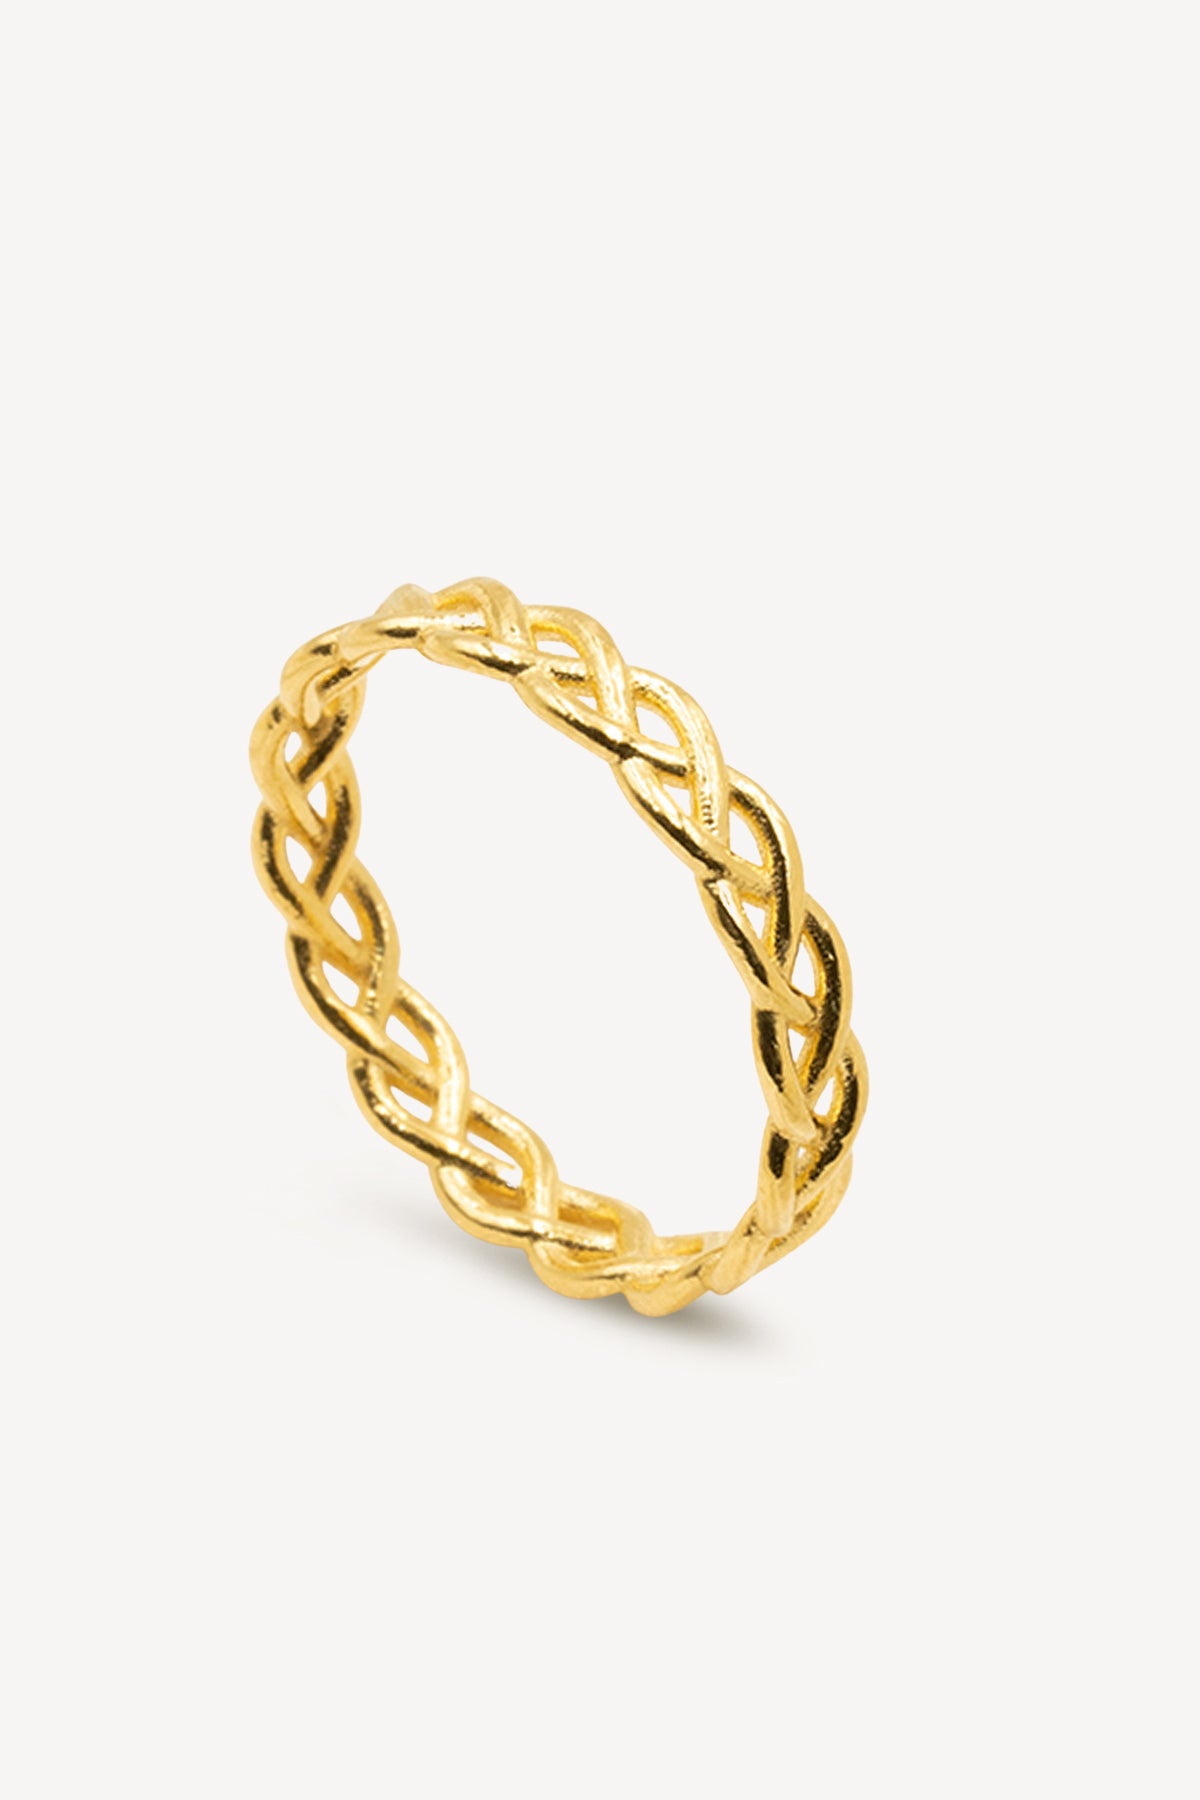 916 Gold ring for ladies